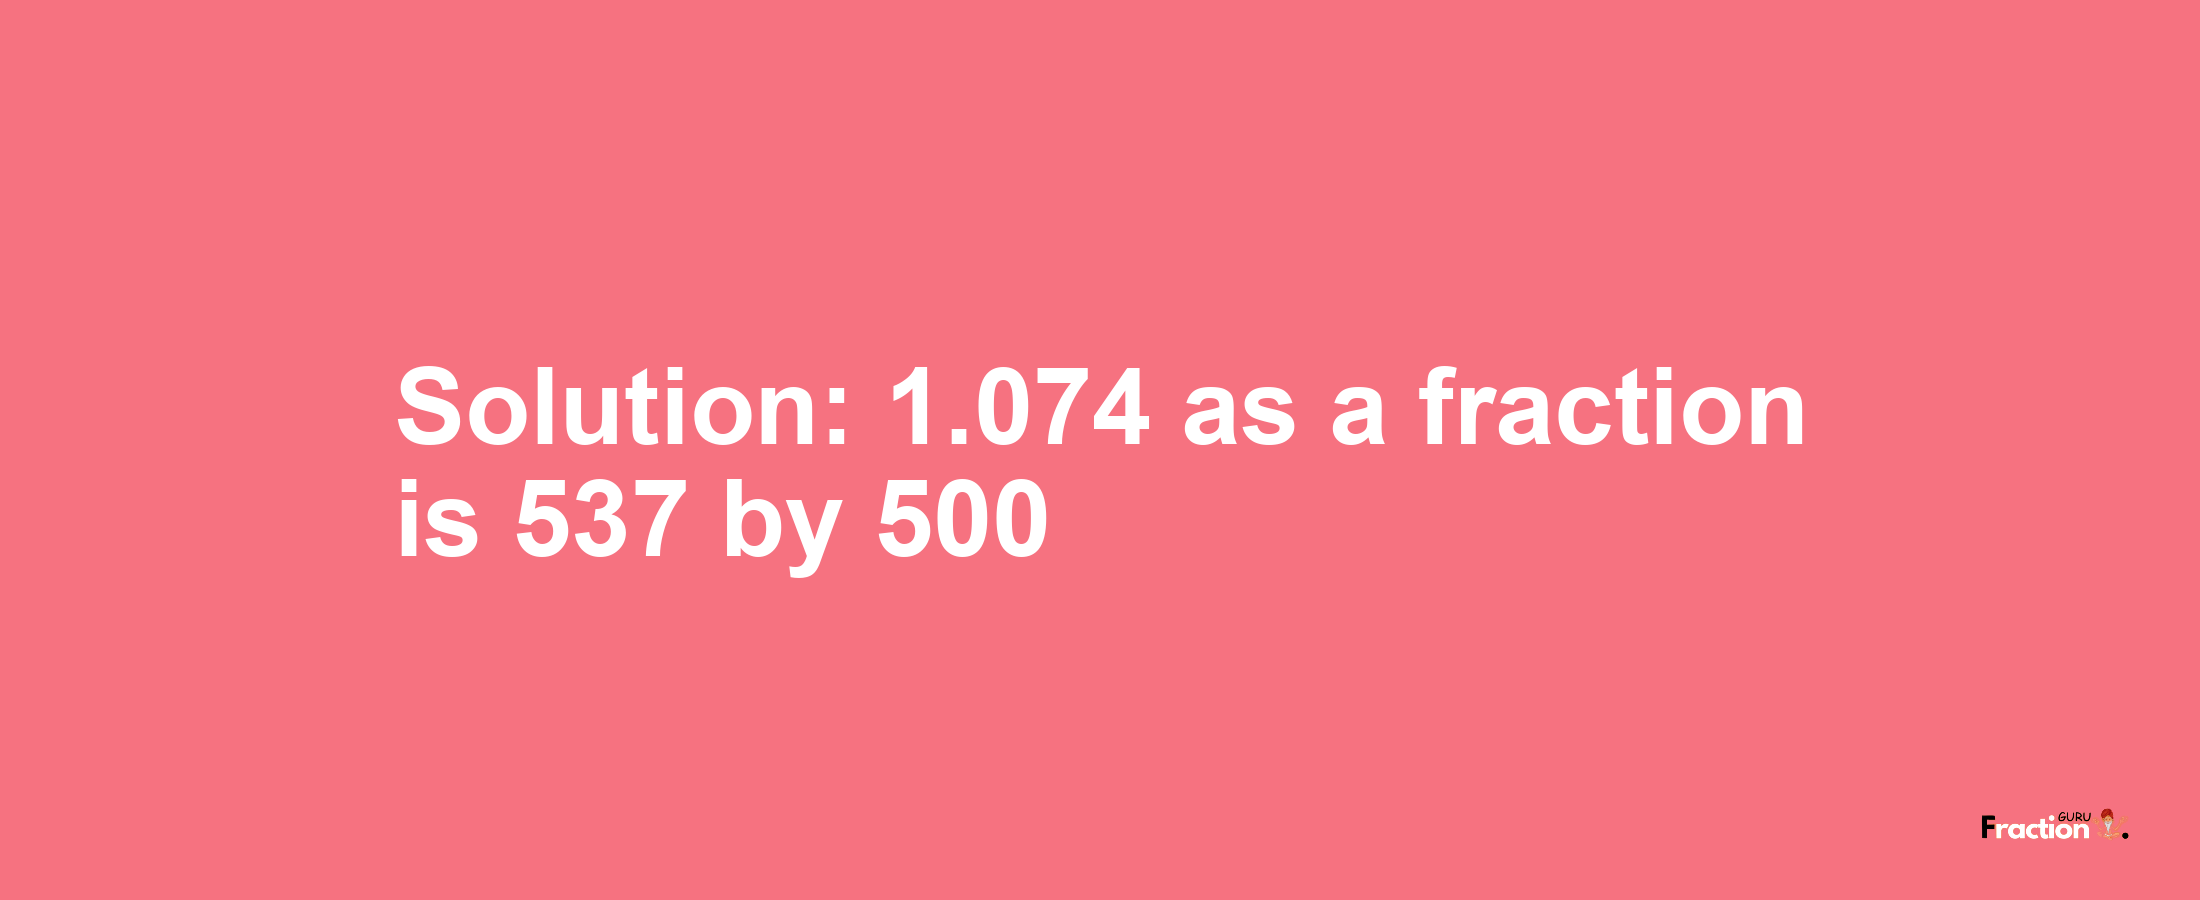 Solution:1.074 as a fraction is 537/500